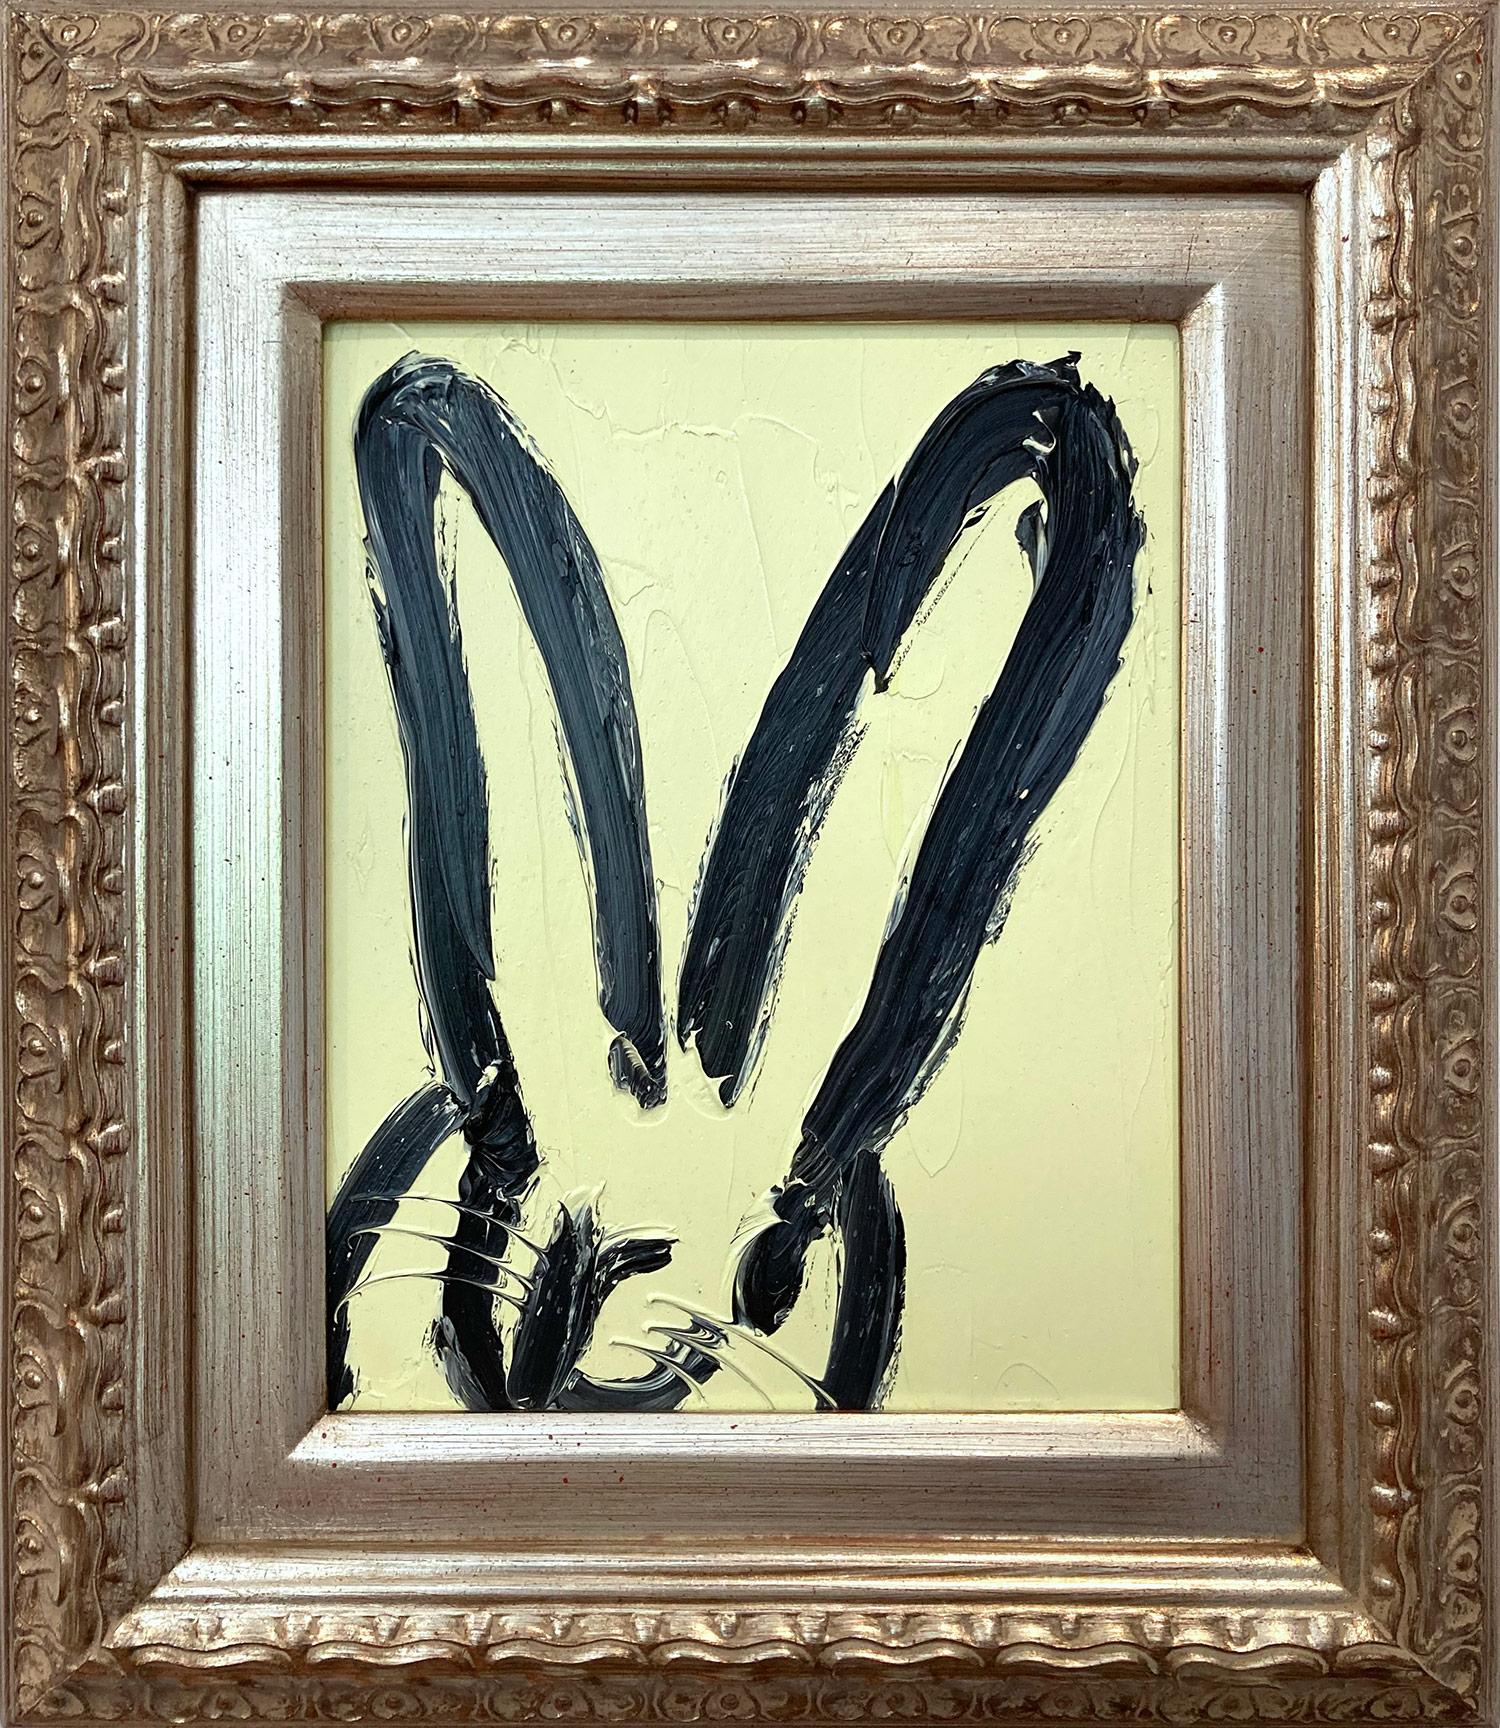 "Pale" Black Bunny on Pale Green Background Oil Painting on Wood Panel Framed